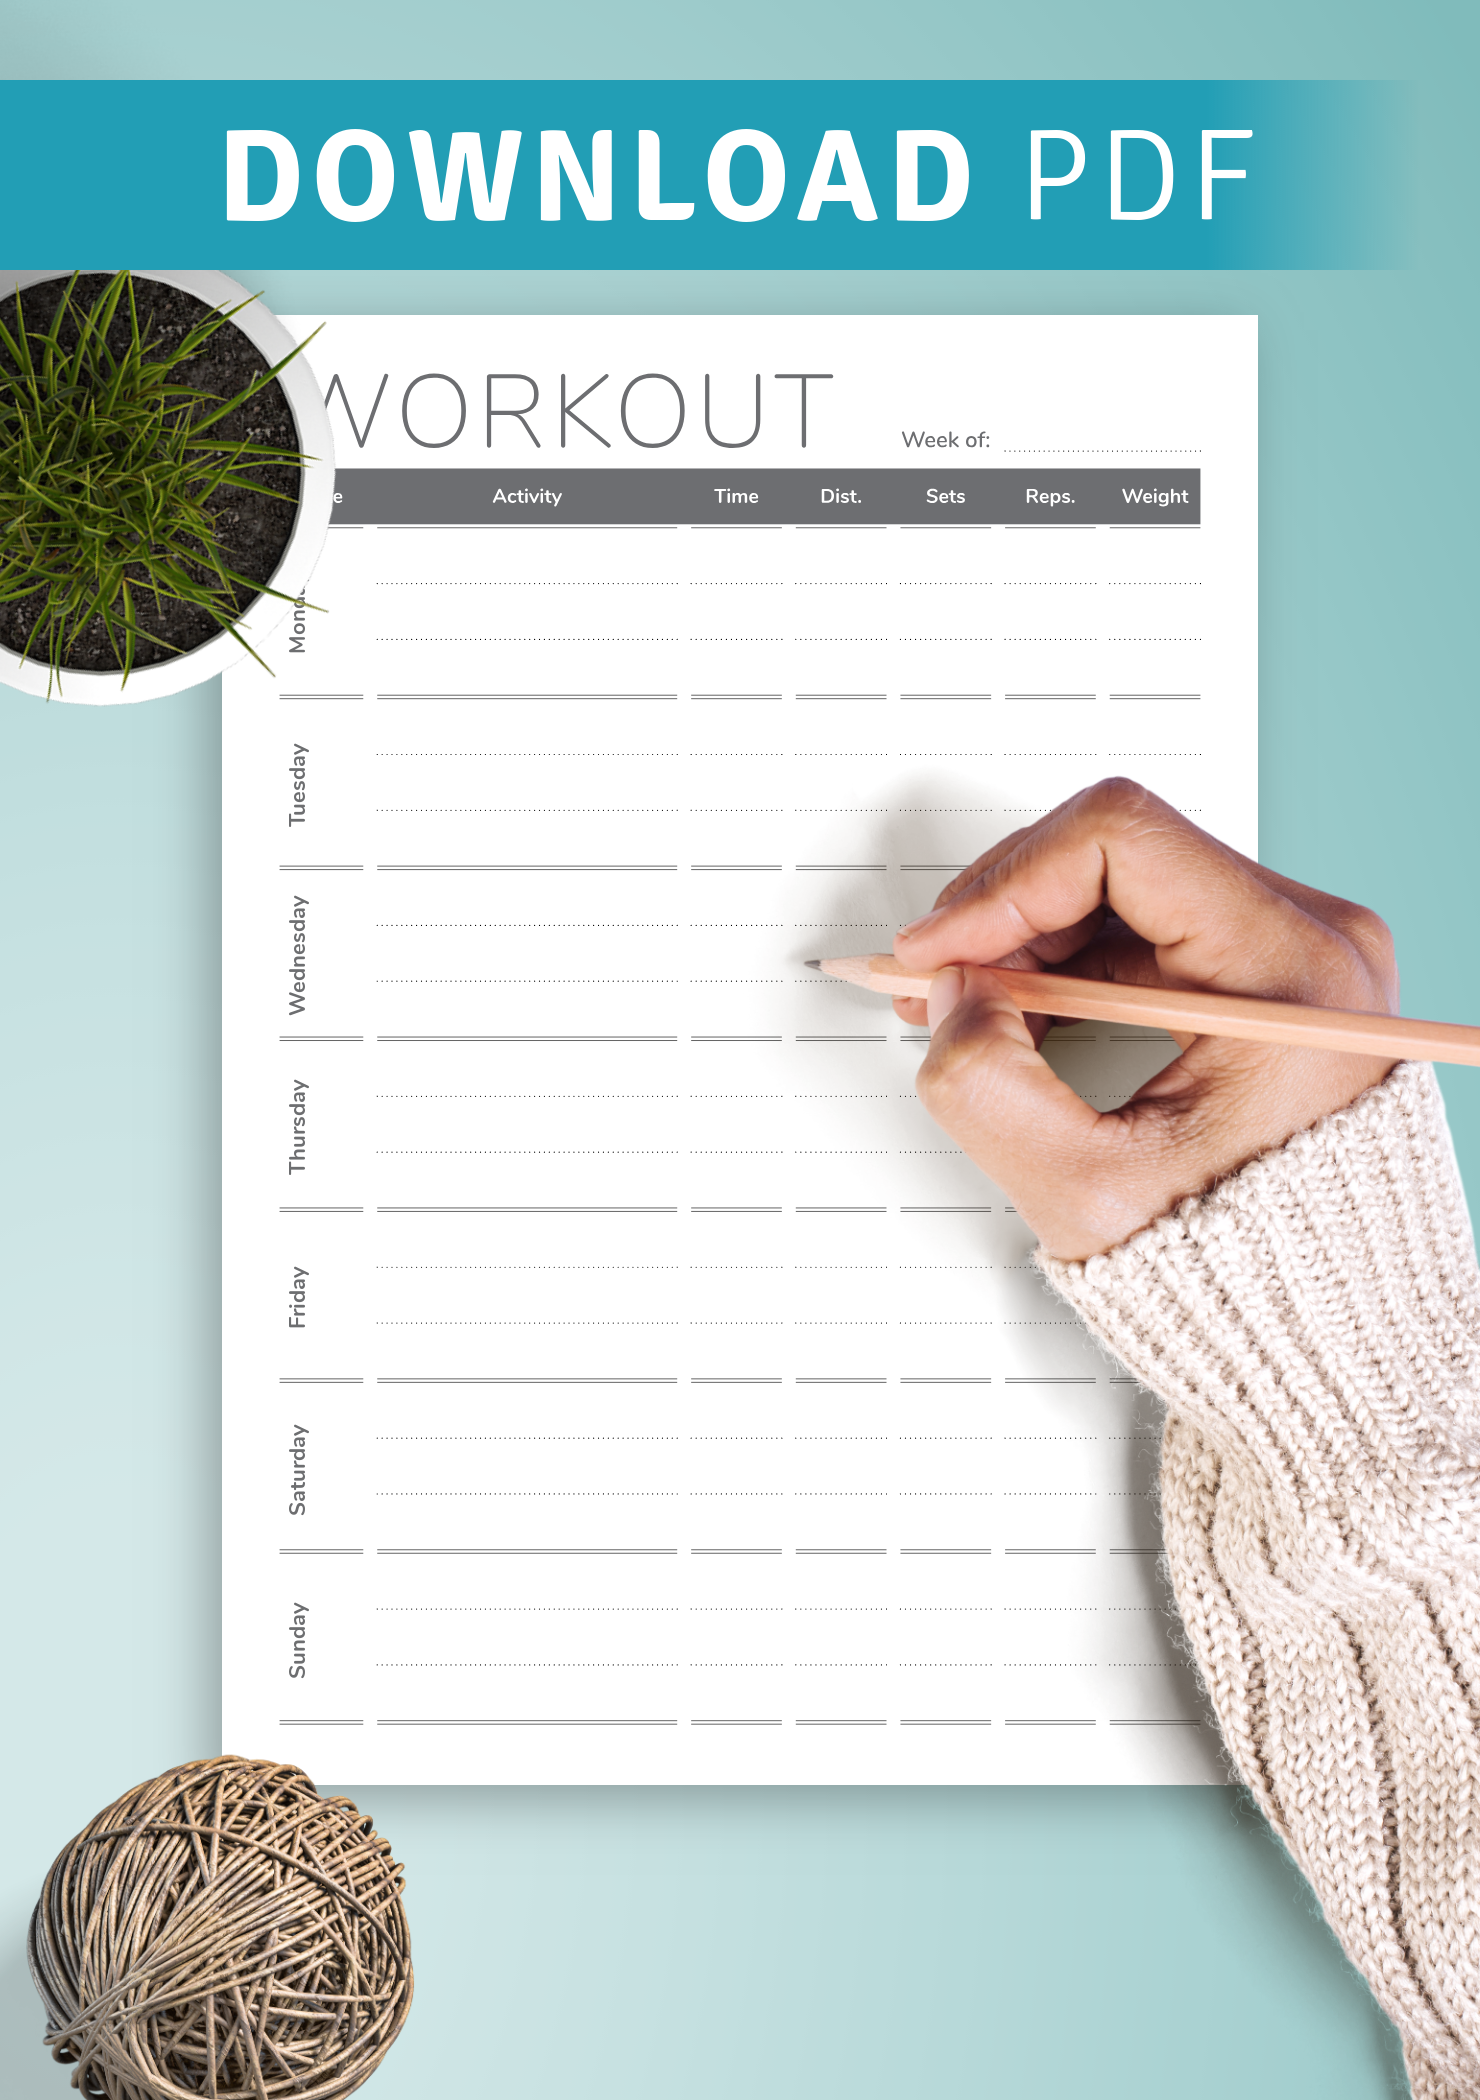 Printable Weekly Fitness Planner | Instant Download PDF | A4 & Letter